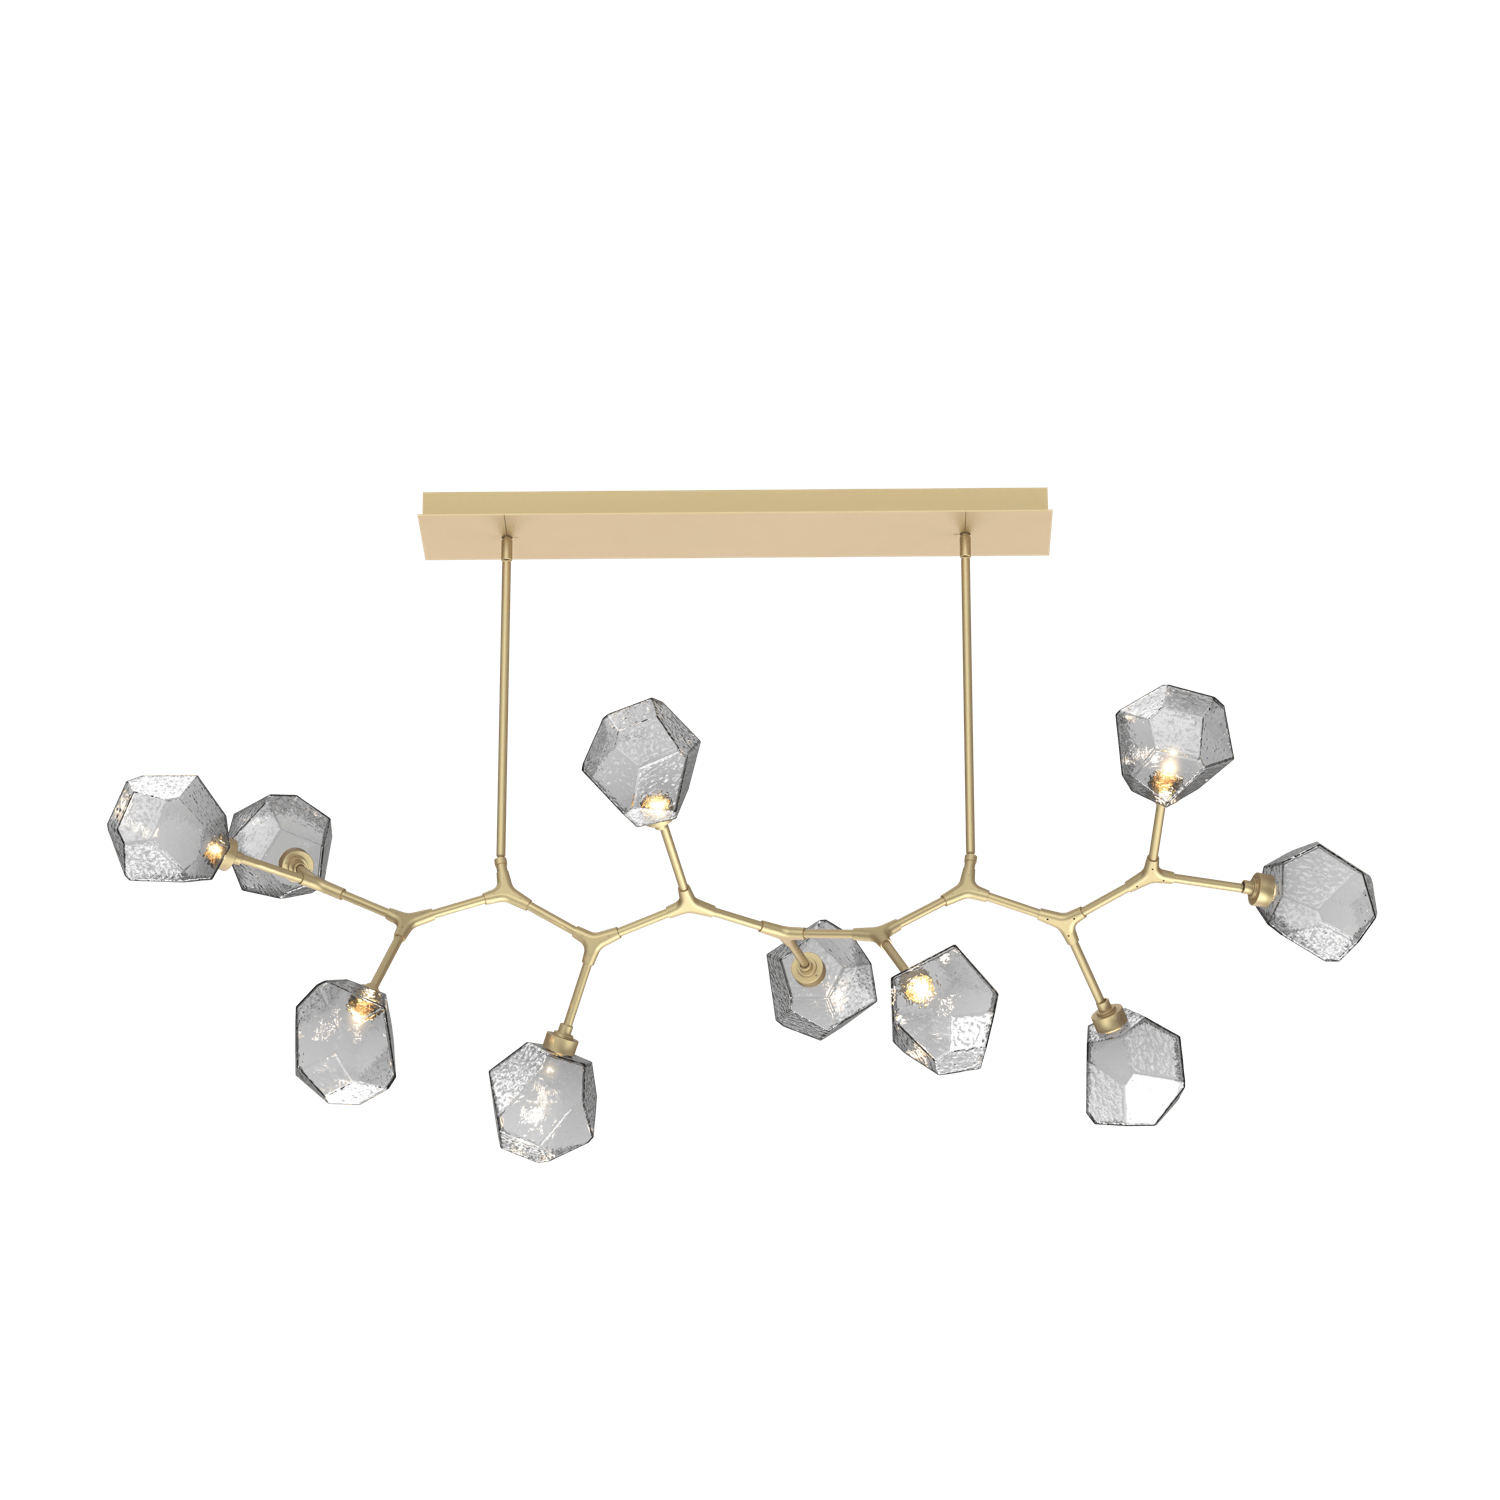 PLB0039-BC-GB-S-Hammerton-Studio-Gem-10-light-modern-branch-chandelier-with-gilded-brass-finish-and-smoke-blown-glass-shades-and-LED-lamping